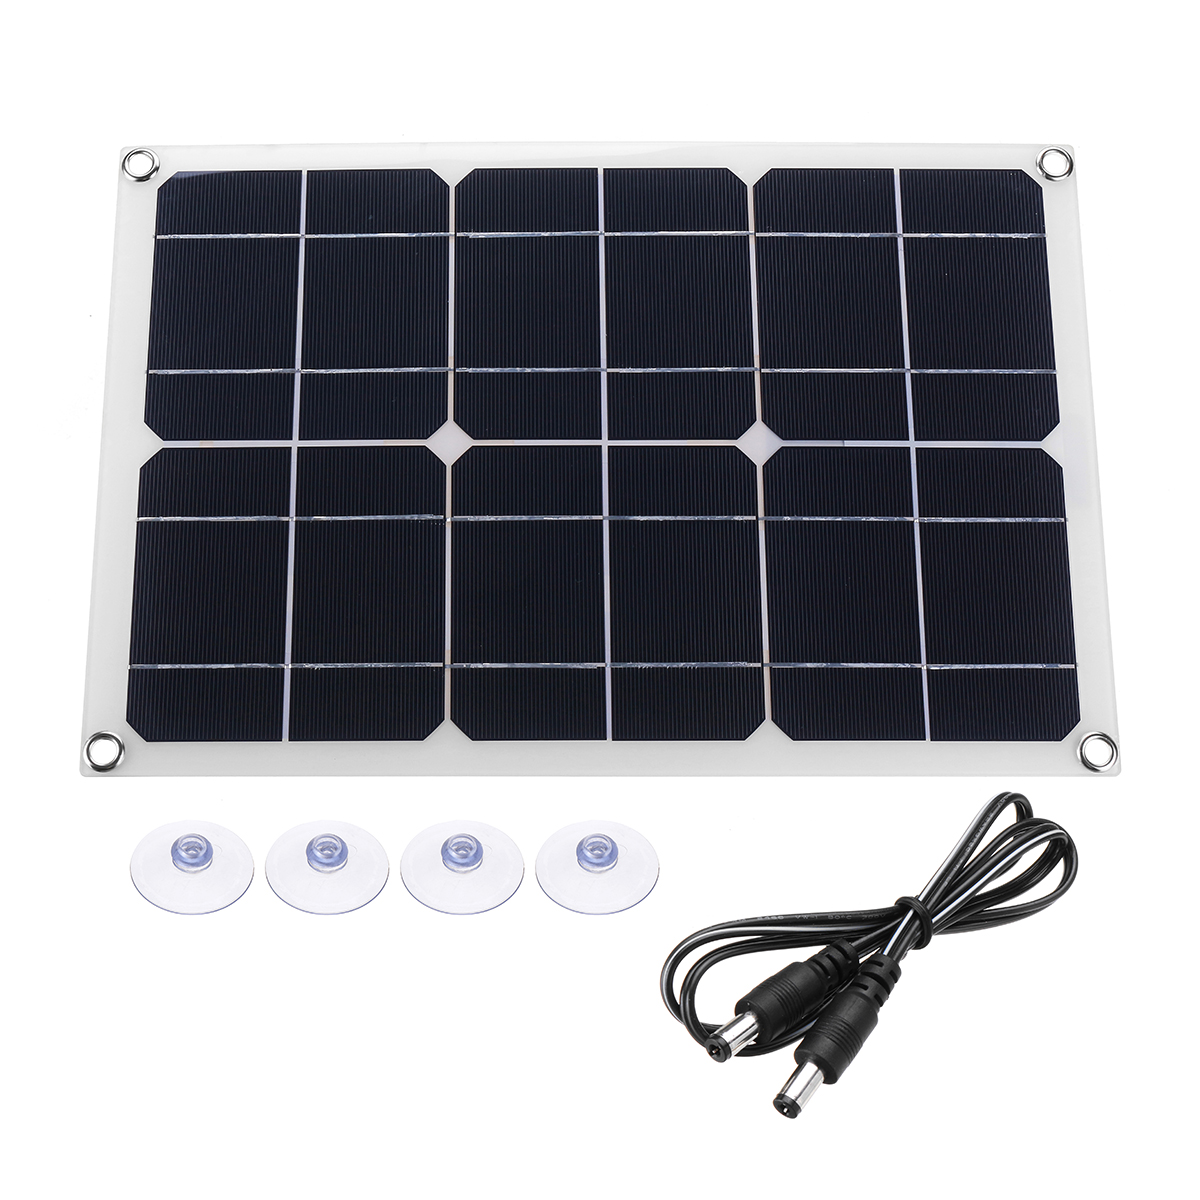 

20W 6V 3A Portable Solar Panel Double USB Port Camping Hiking Cycling Traveling